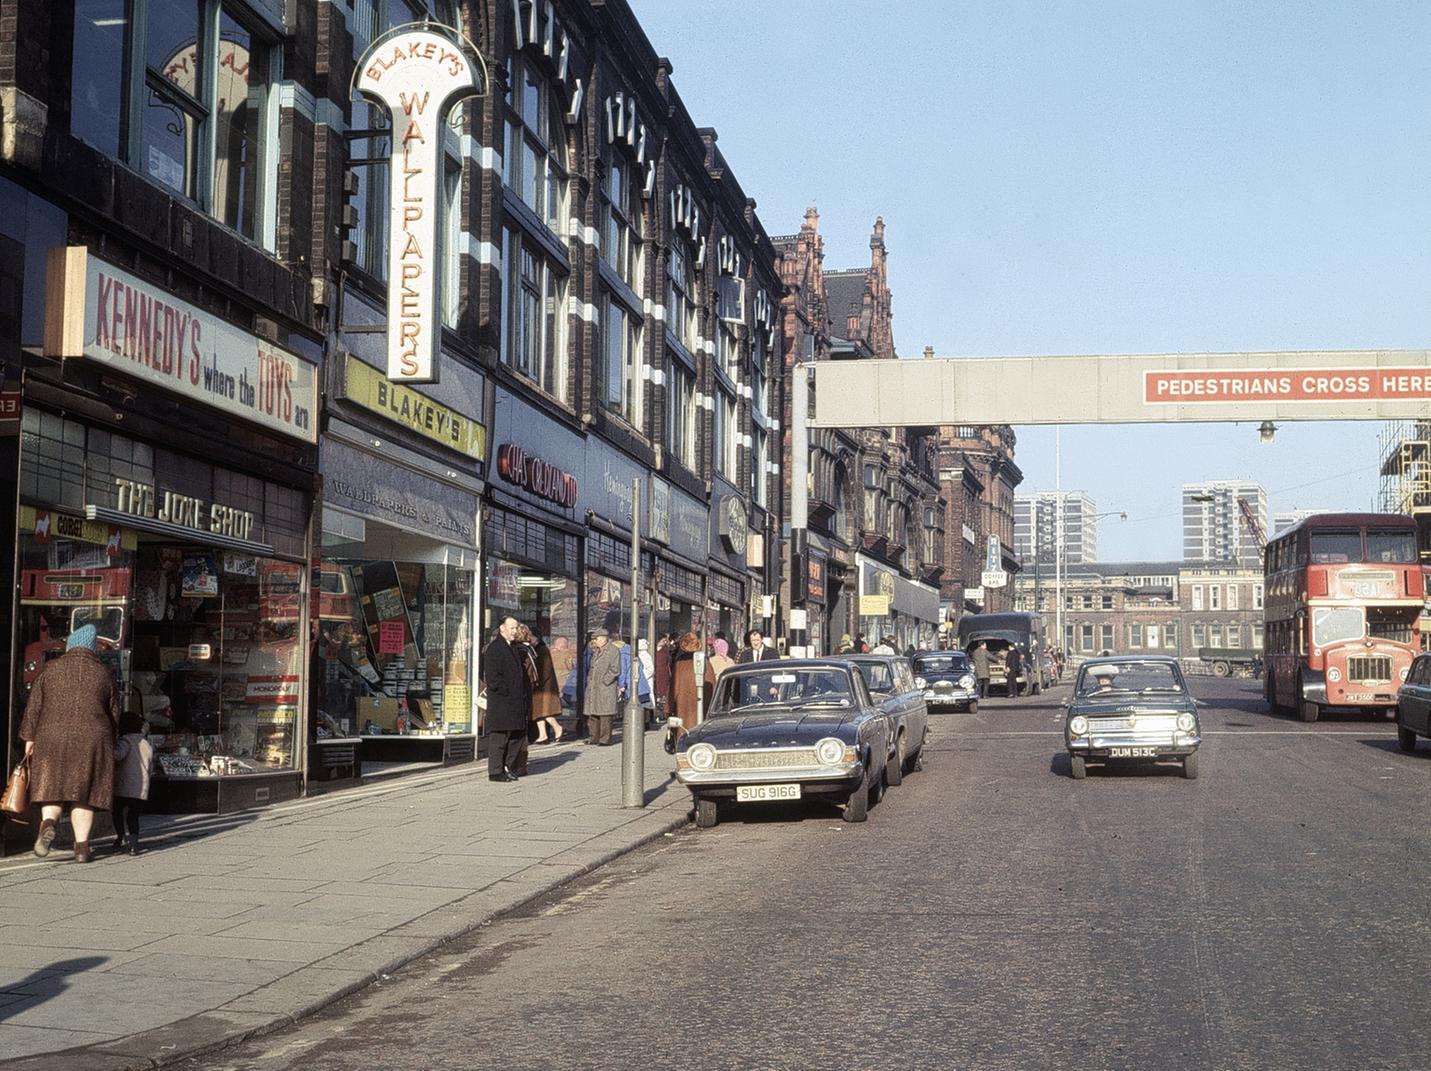 Share your memories of Vicar Lane with Andrew Hutchinson via email at: andrew.hutchinson@jpress.co.uk or tweet him: @AndyHutchYPN